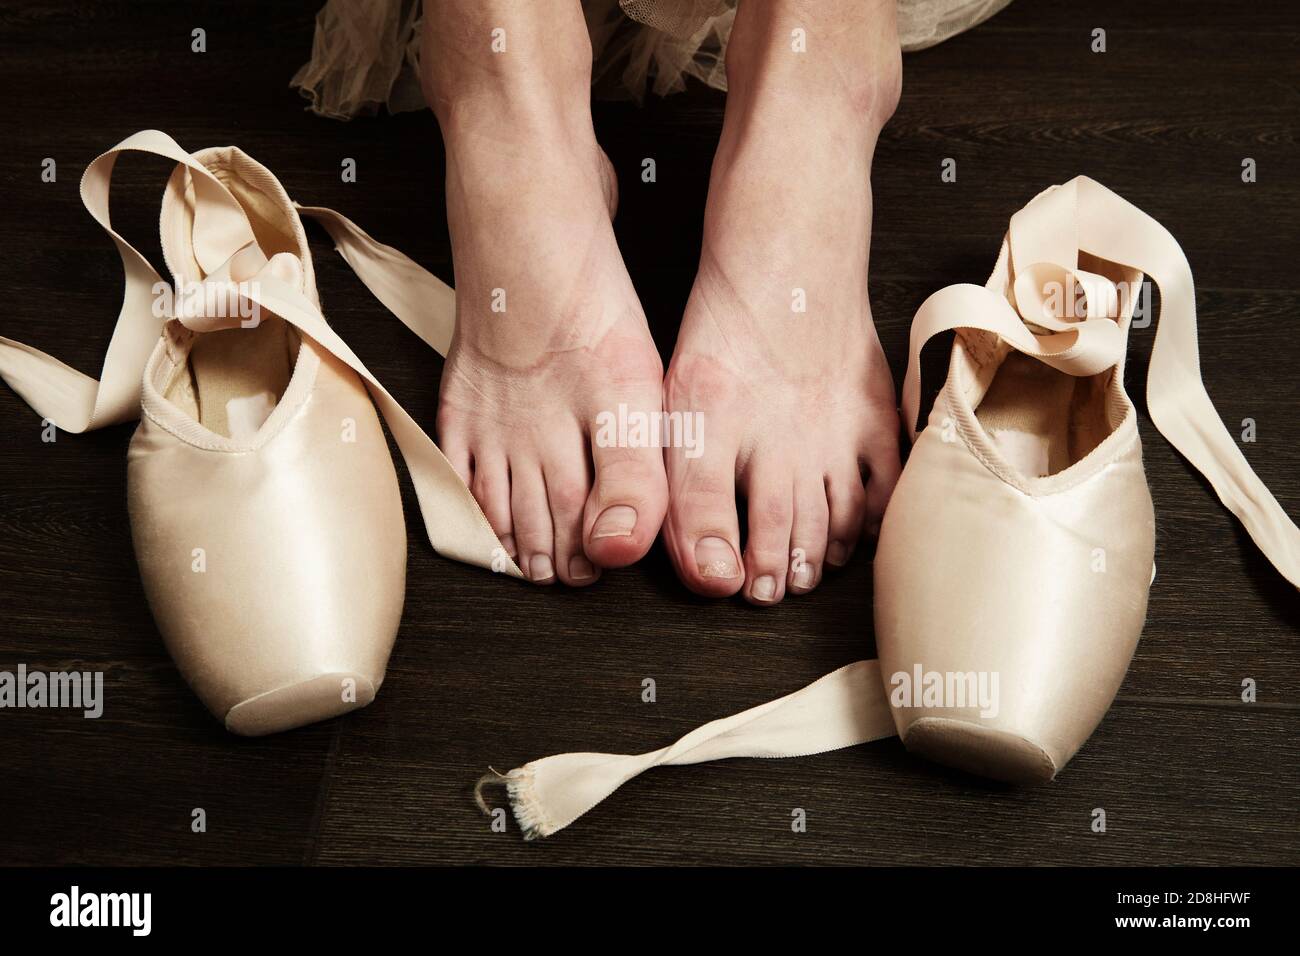 female ballerina feet with pointes after dance on a wooden floor closeup image Stock Photo